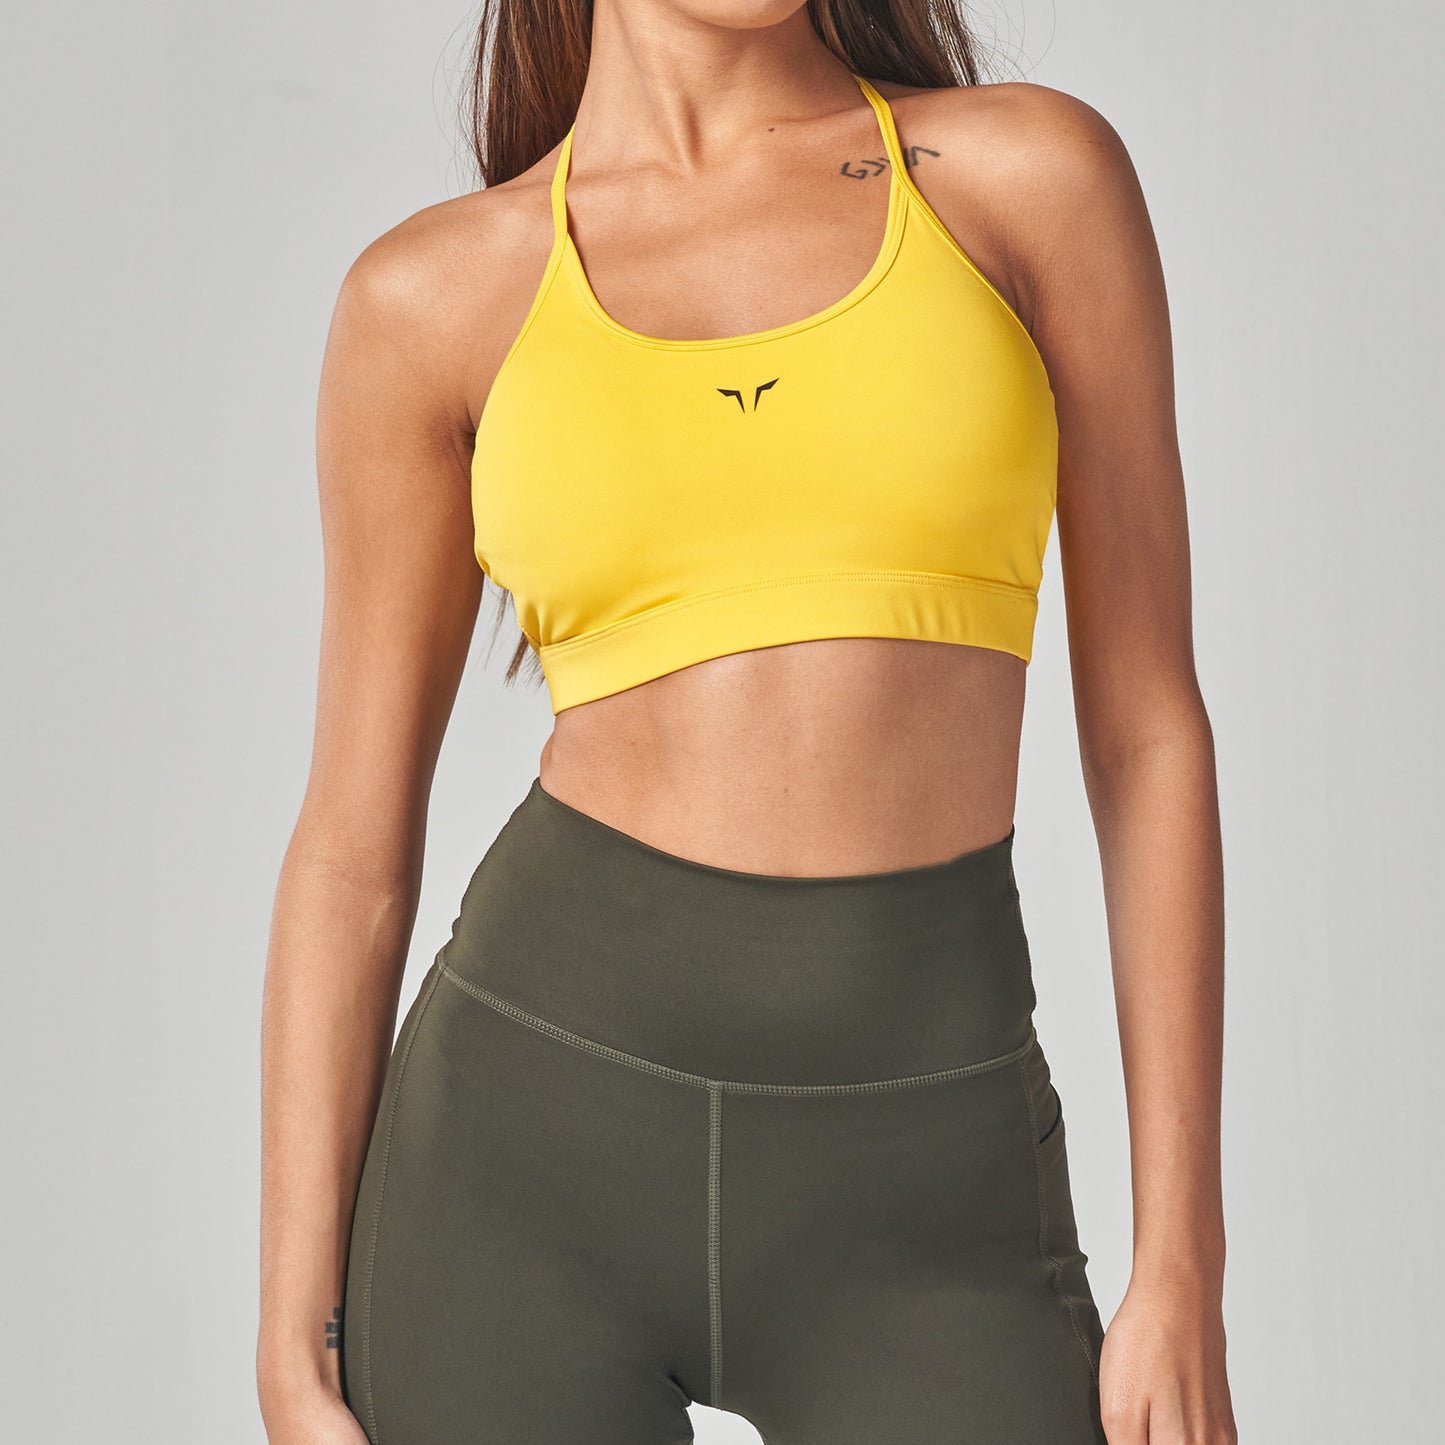 squatwolf-workout-clothes-essential-low-impact-bra-yellow-sports-bra-for-gym